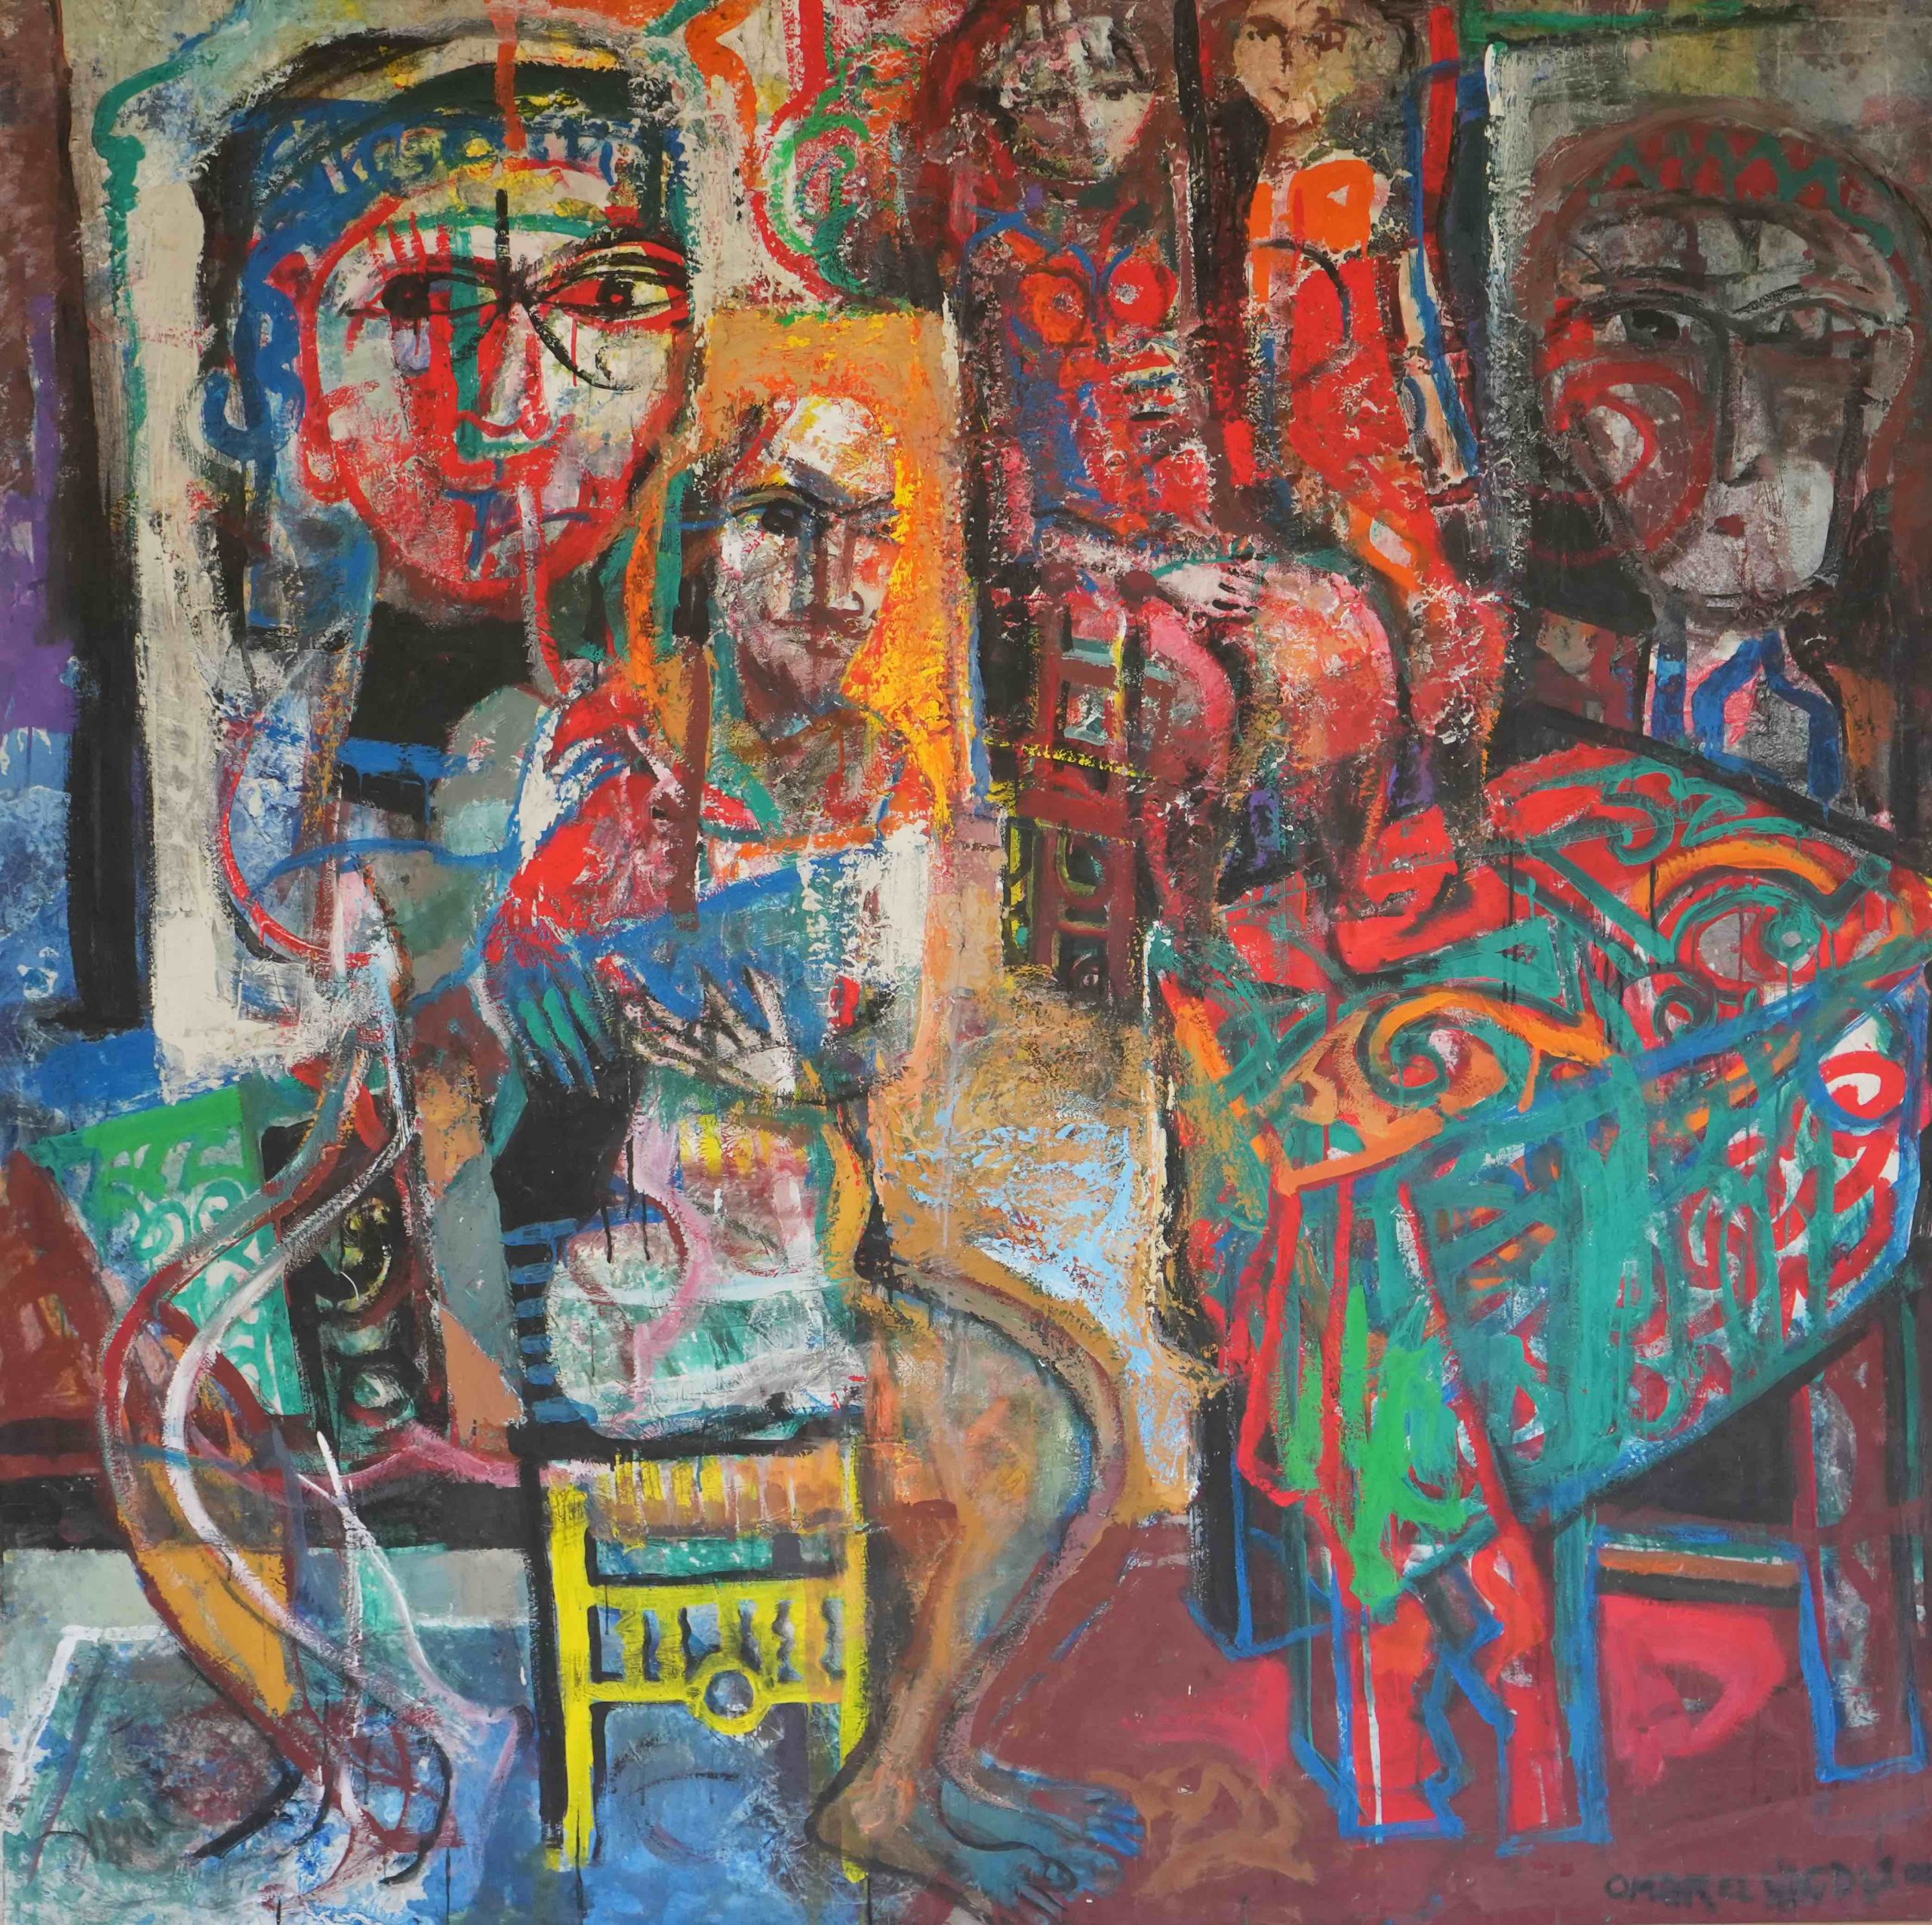 Omar El Nagdi Oil on canvas 190 x 190 cm Signed and dated 2000